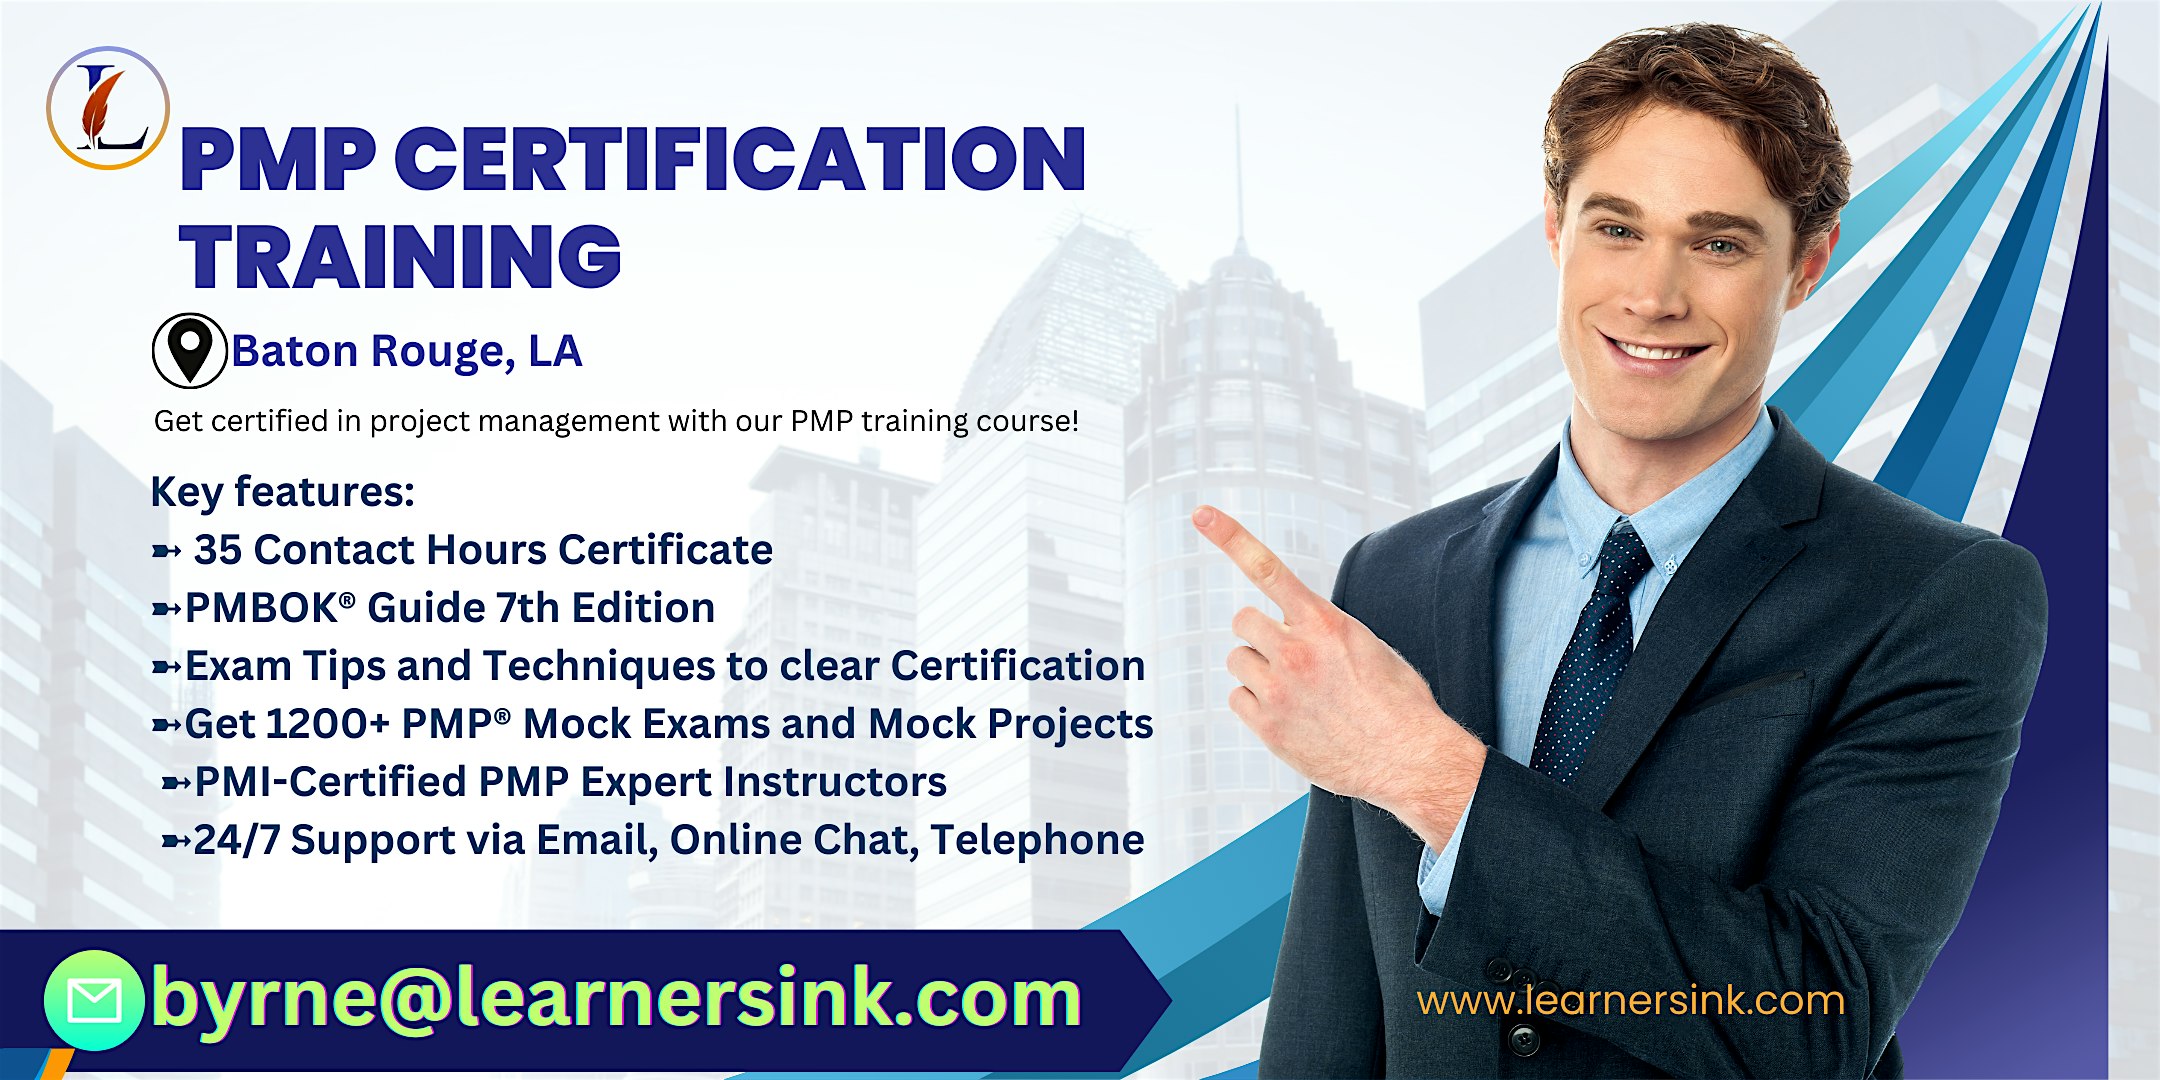 PMP Training Bootcamp in Baton Rouge, LA